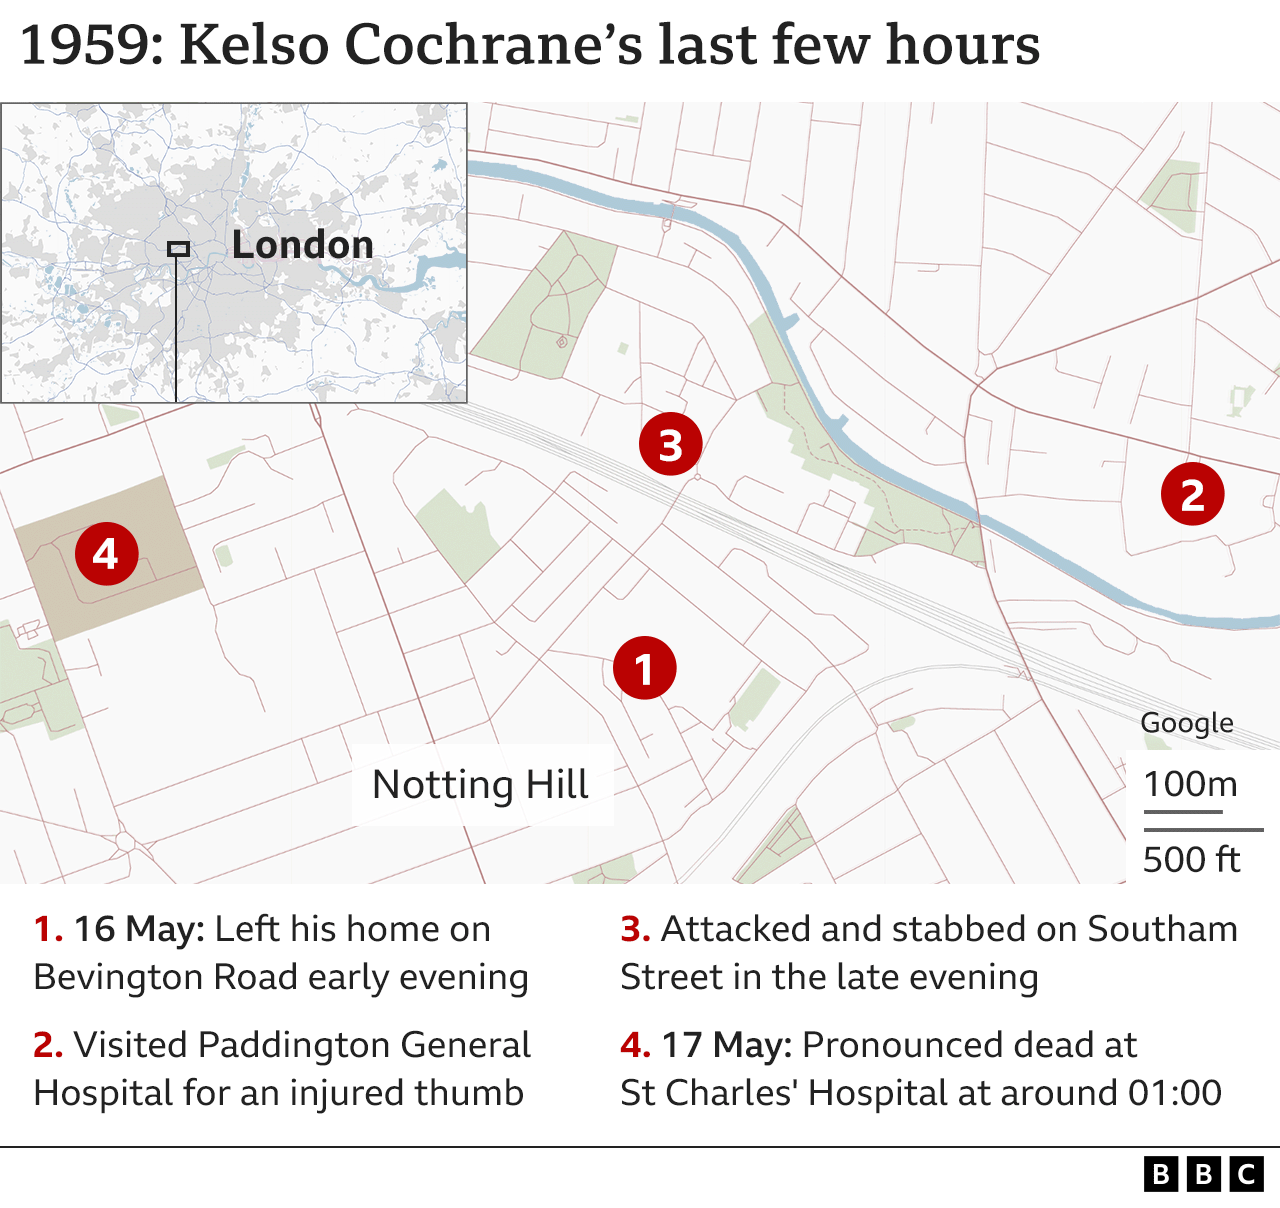 Map of West London highlighting Cochrane's house, and where he was killed, a few streets away